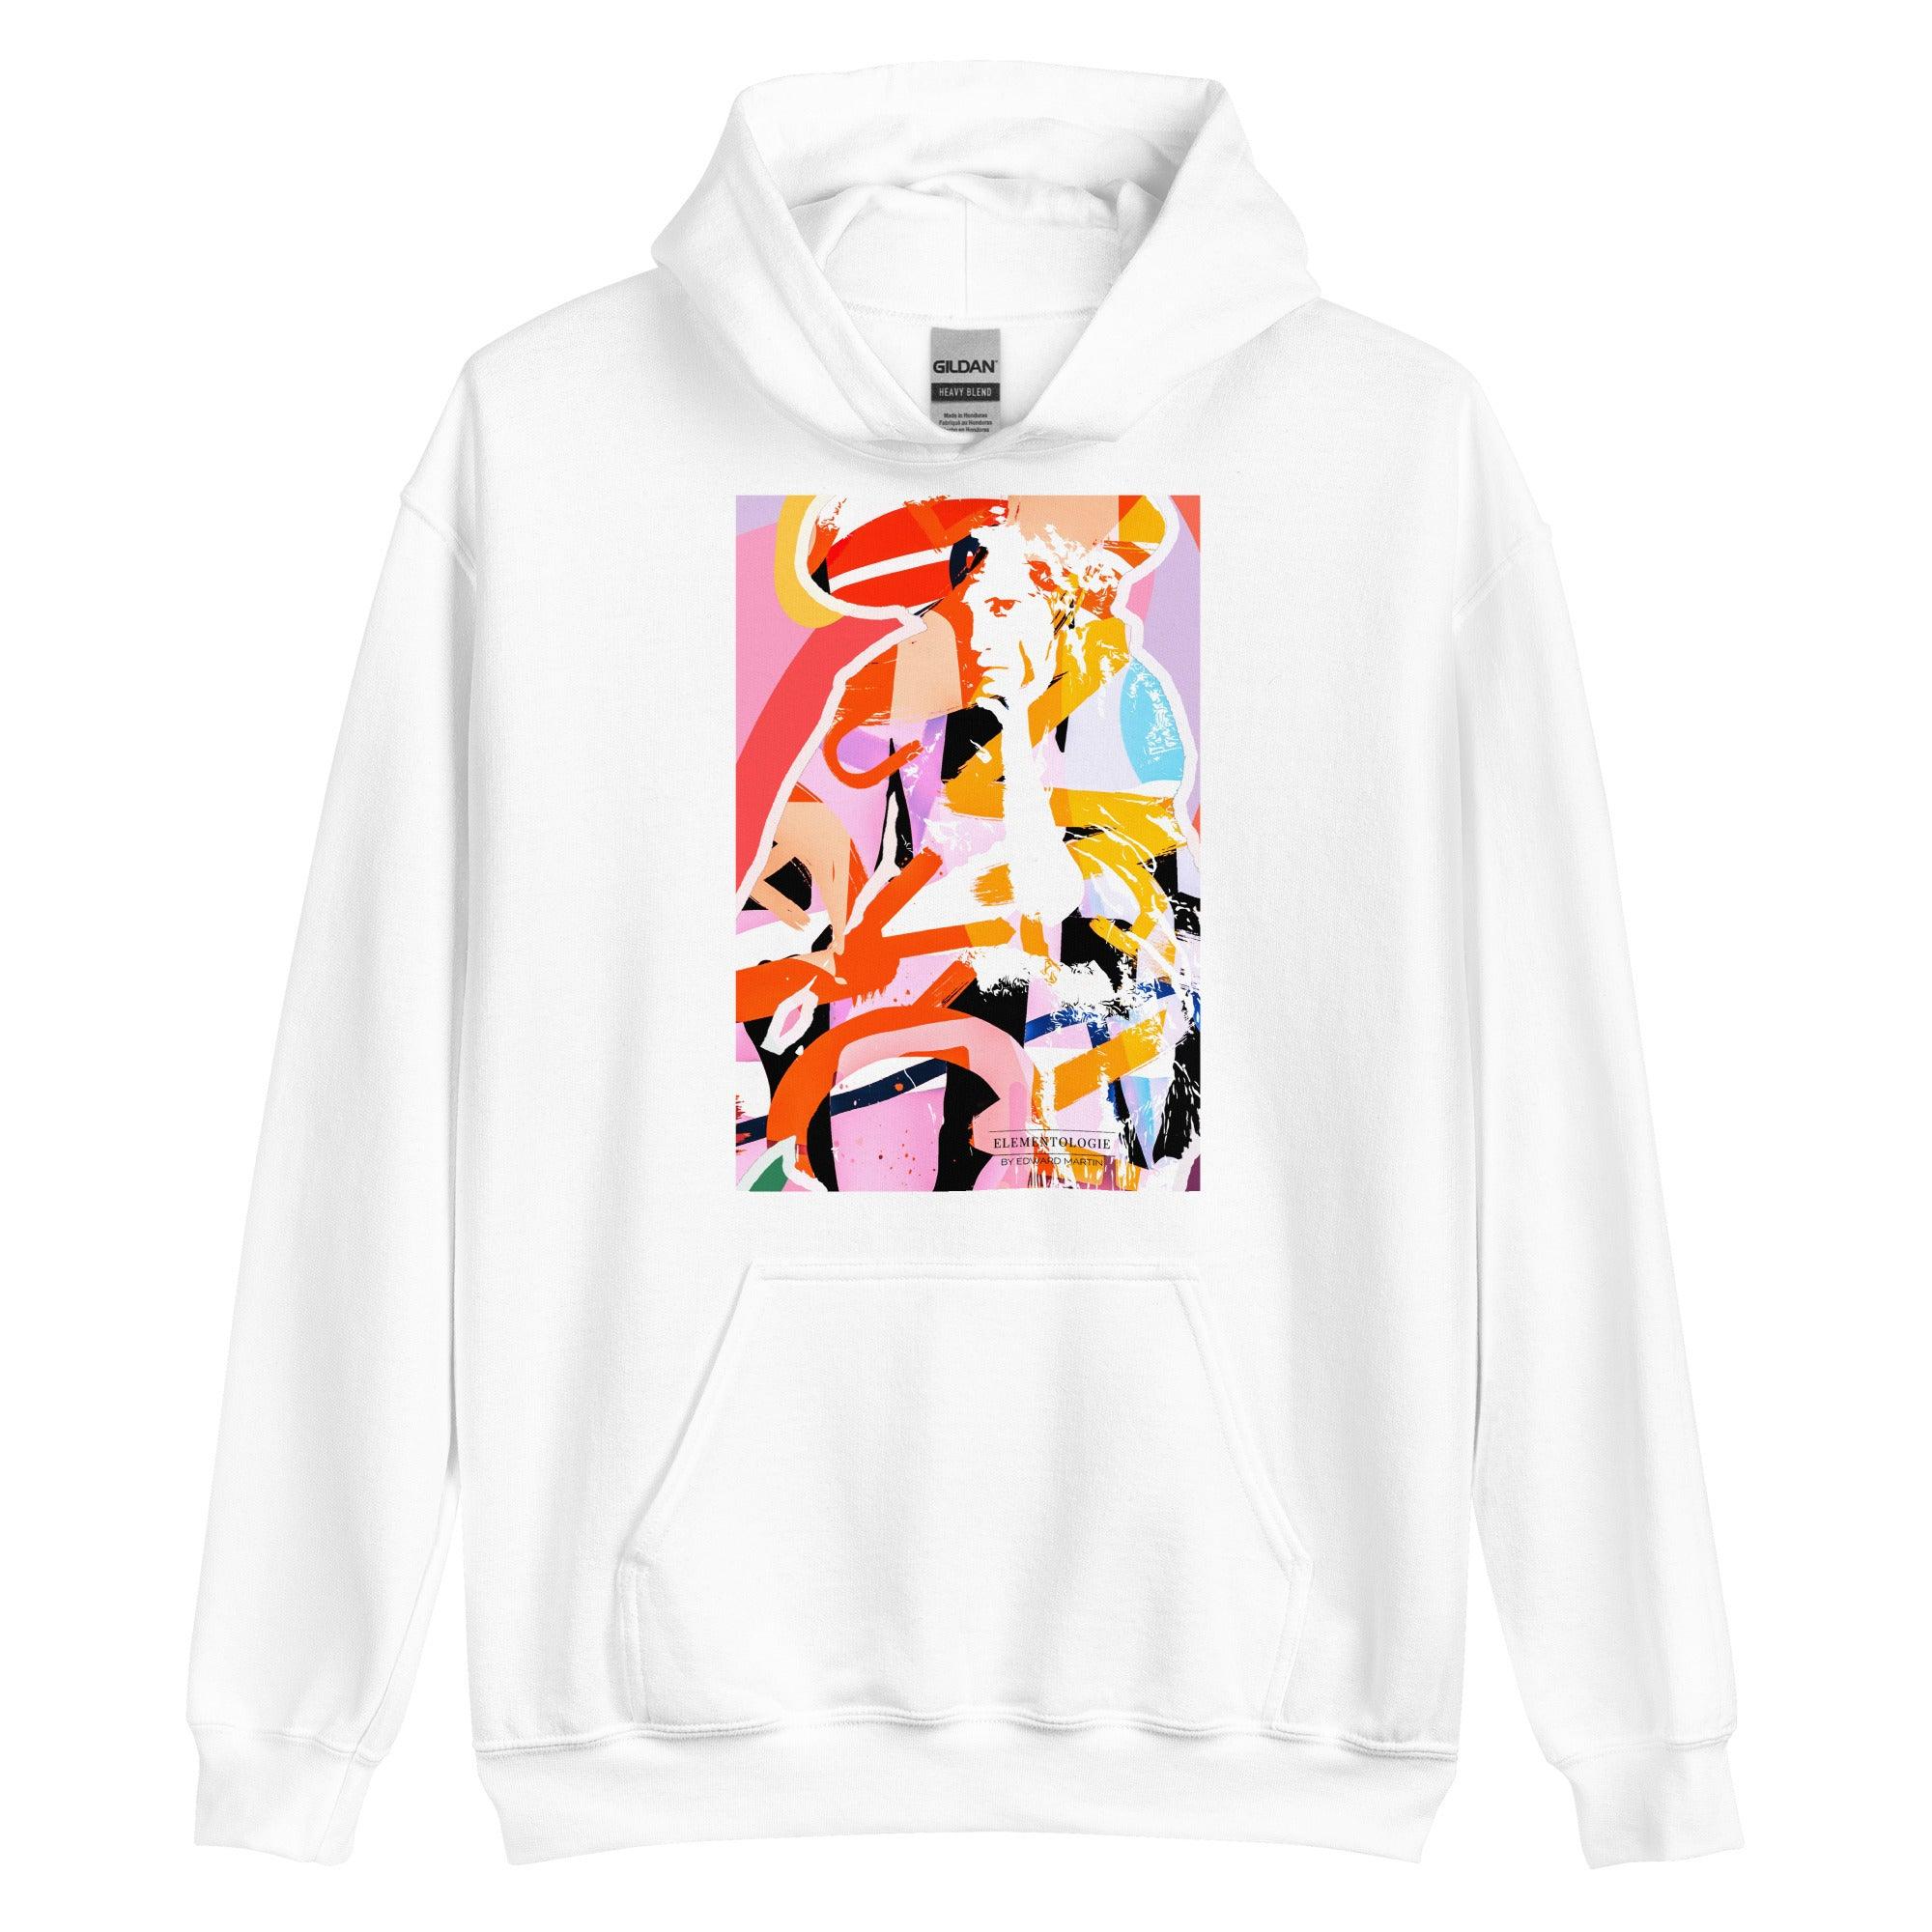 Unisex Hoodie-Why are you here? by Edward Martin - Elementologie